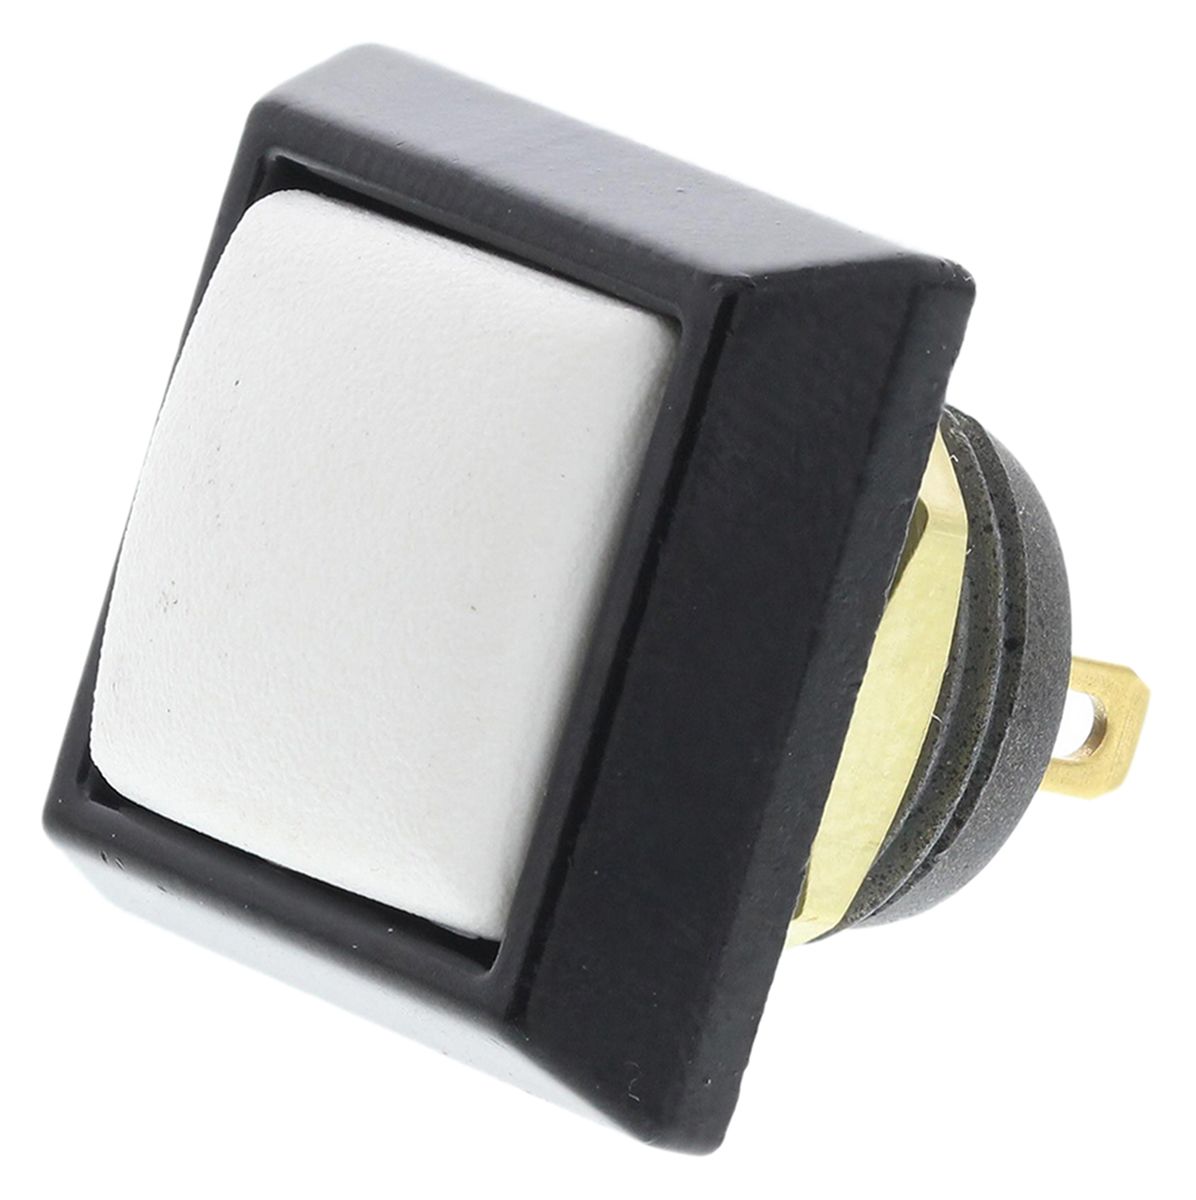 ITW Switches 59 Series Momentary Miniature Push Button Switch, Panel Mount, SPST, 13.65mm Cutout, Clear LED, 125V ac,